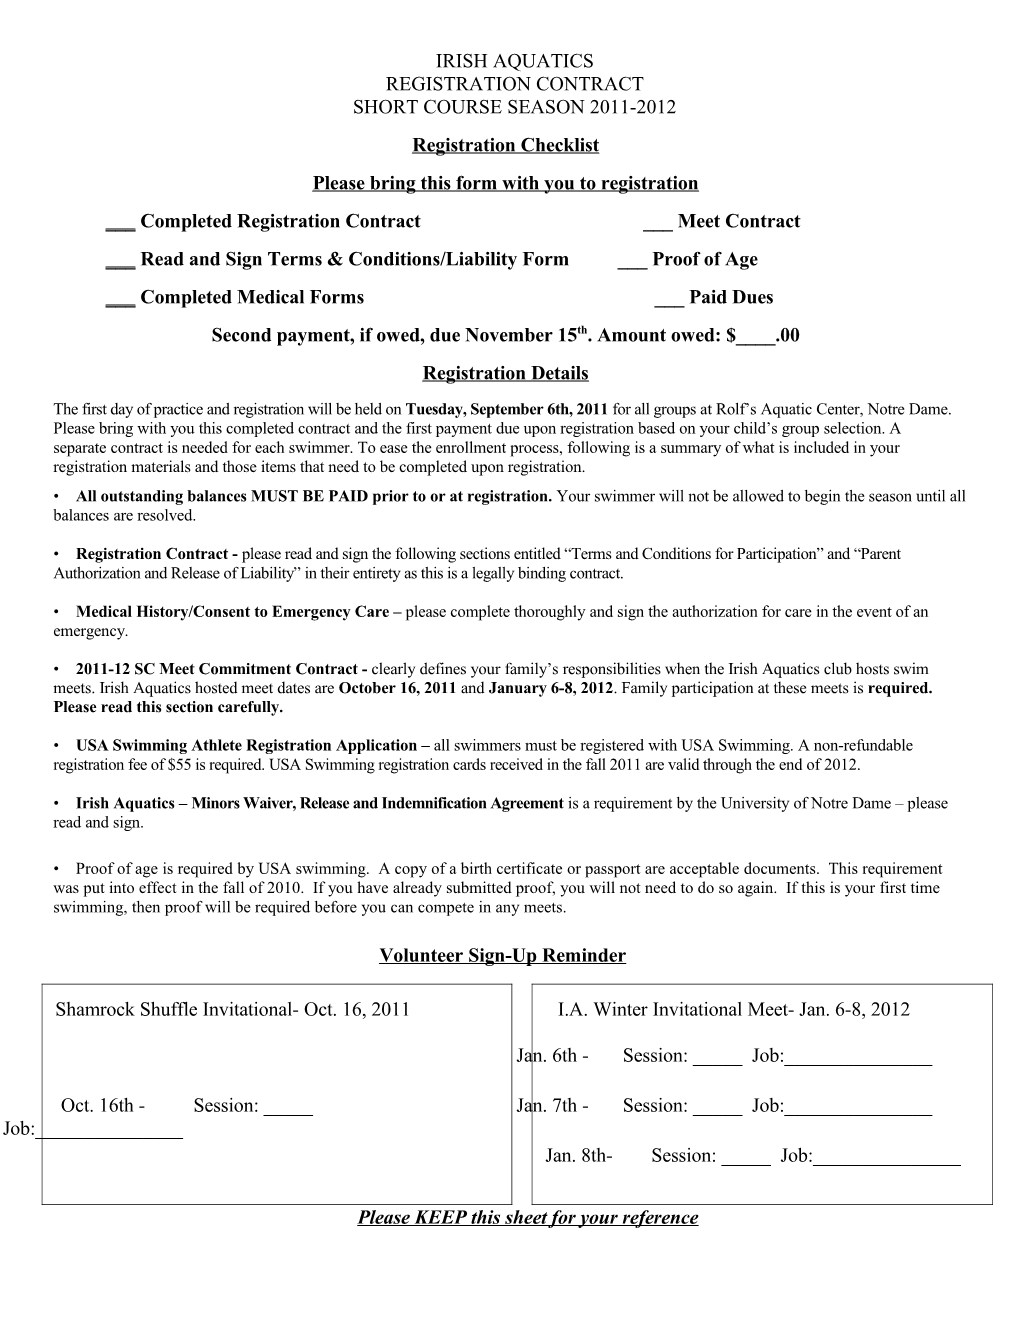 Please Bring This Form with You to Registration